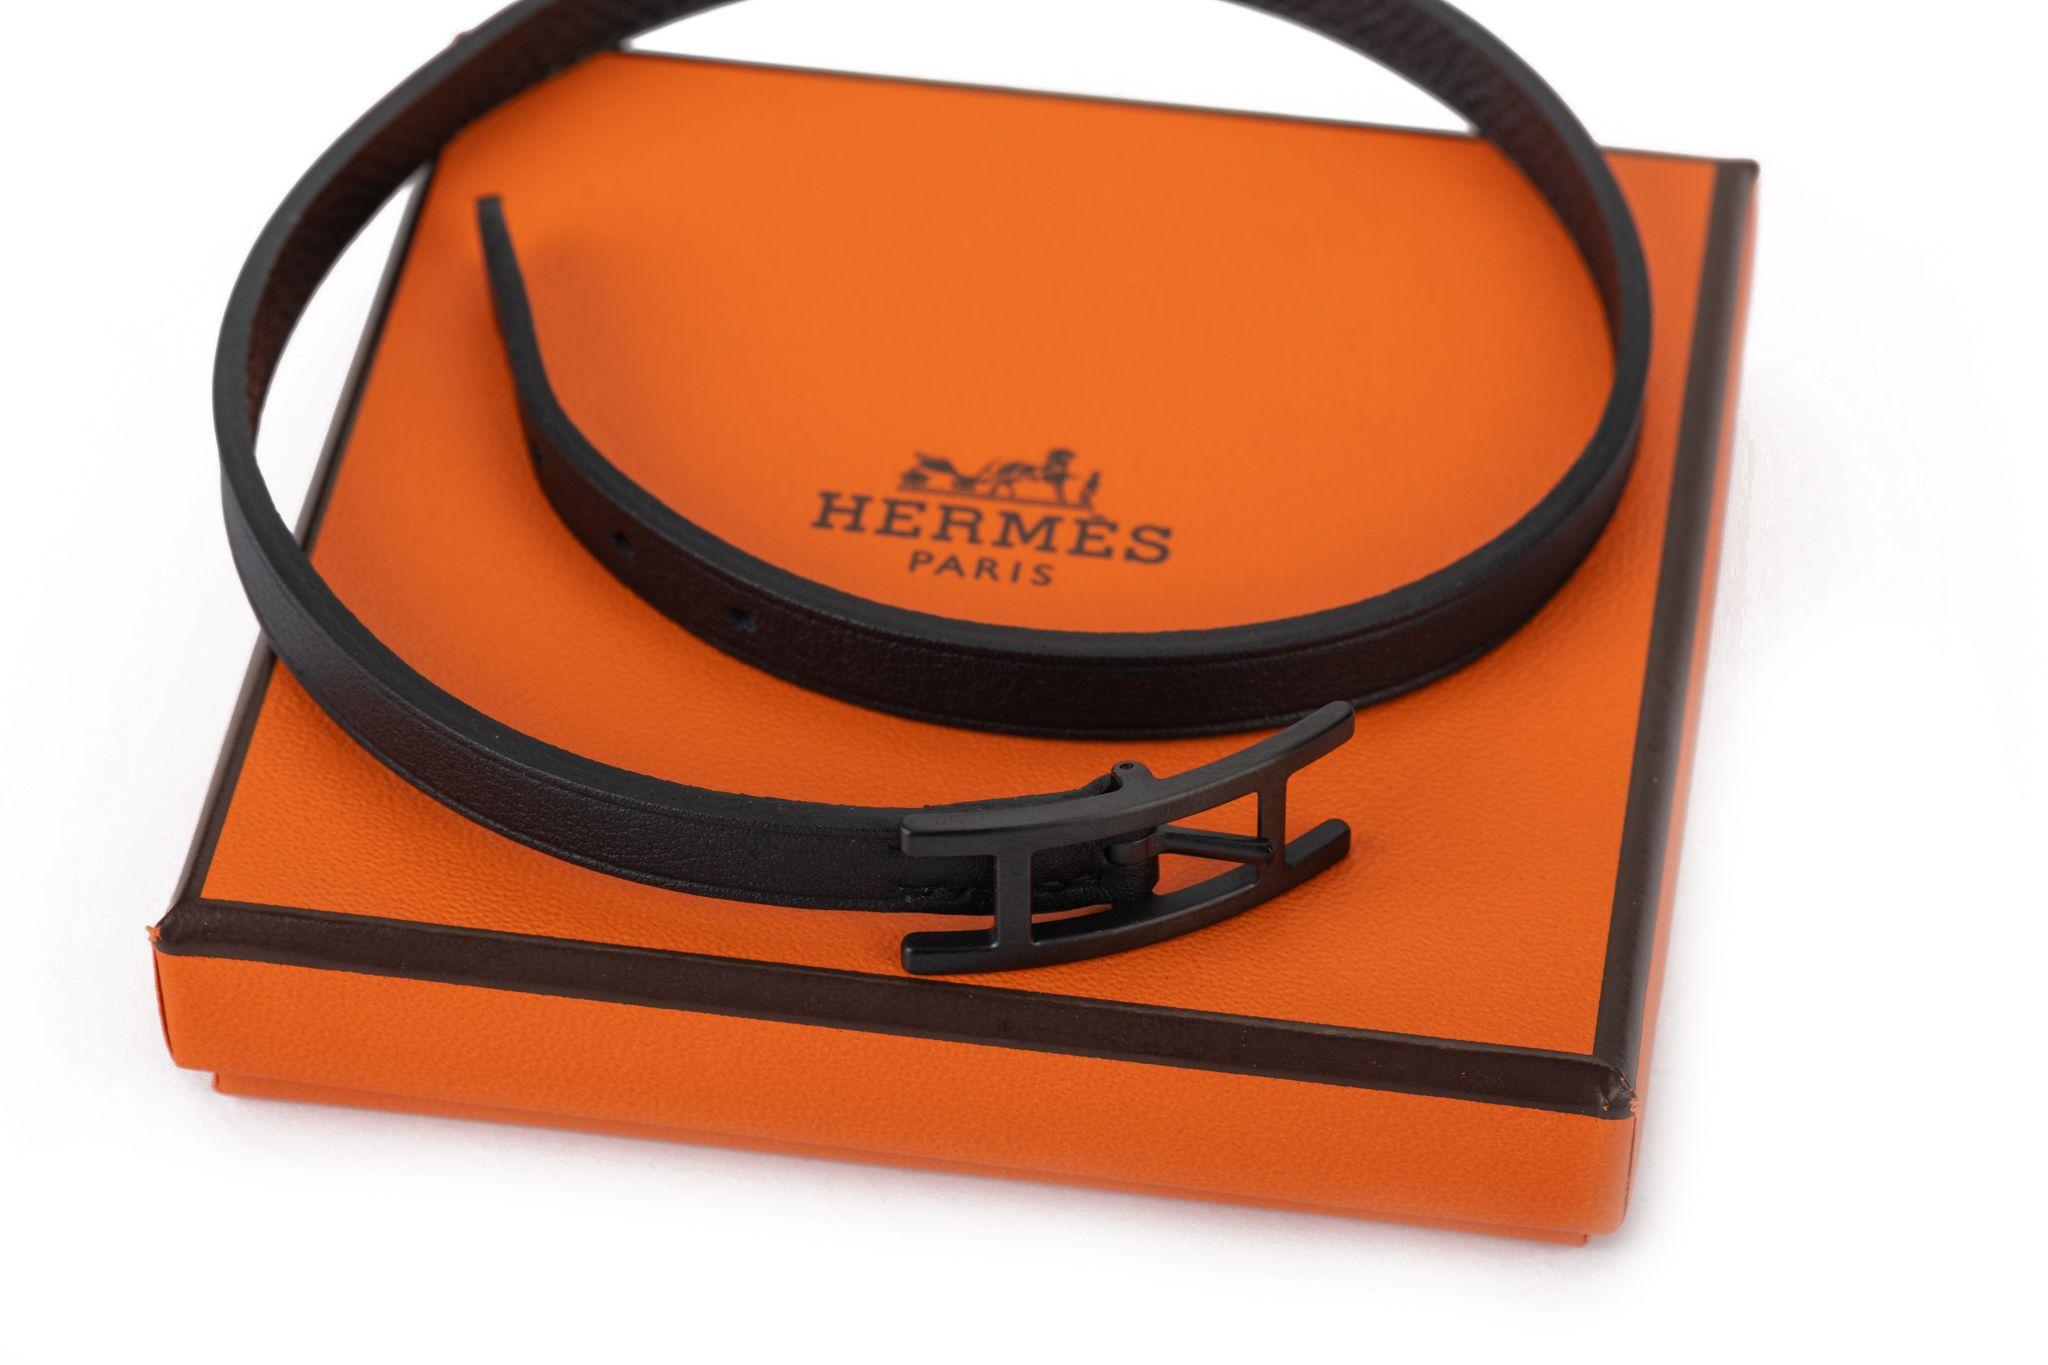 Hermès limited edition so black double Hapi bracelet. Brand new with original dust cover and box.